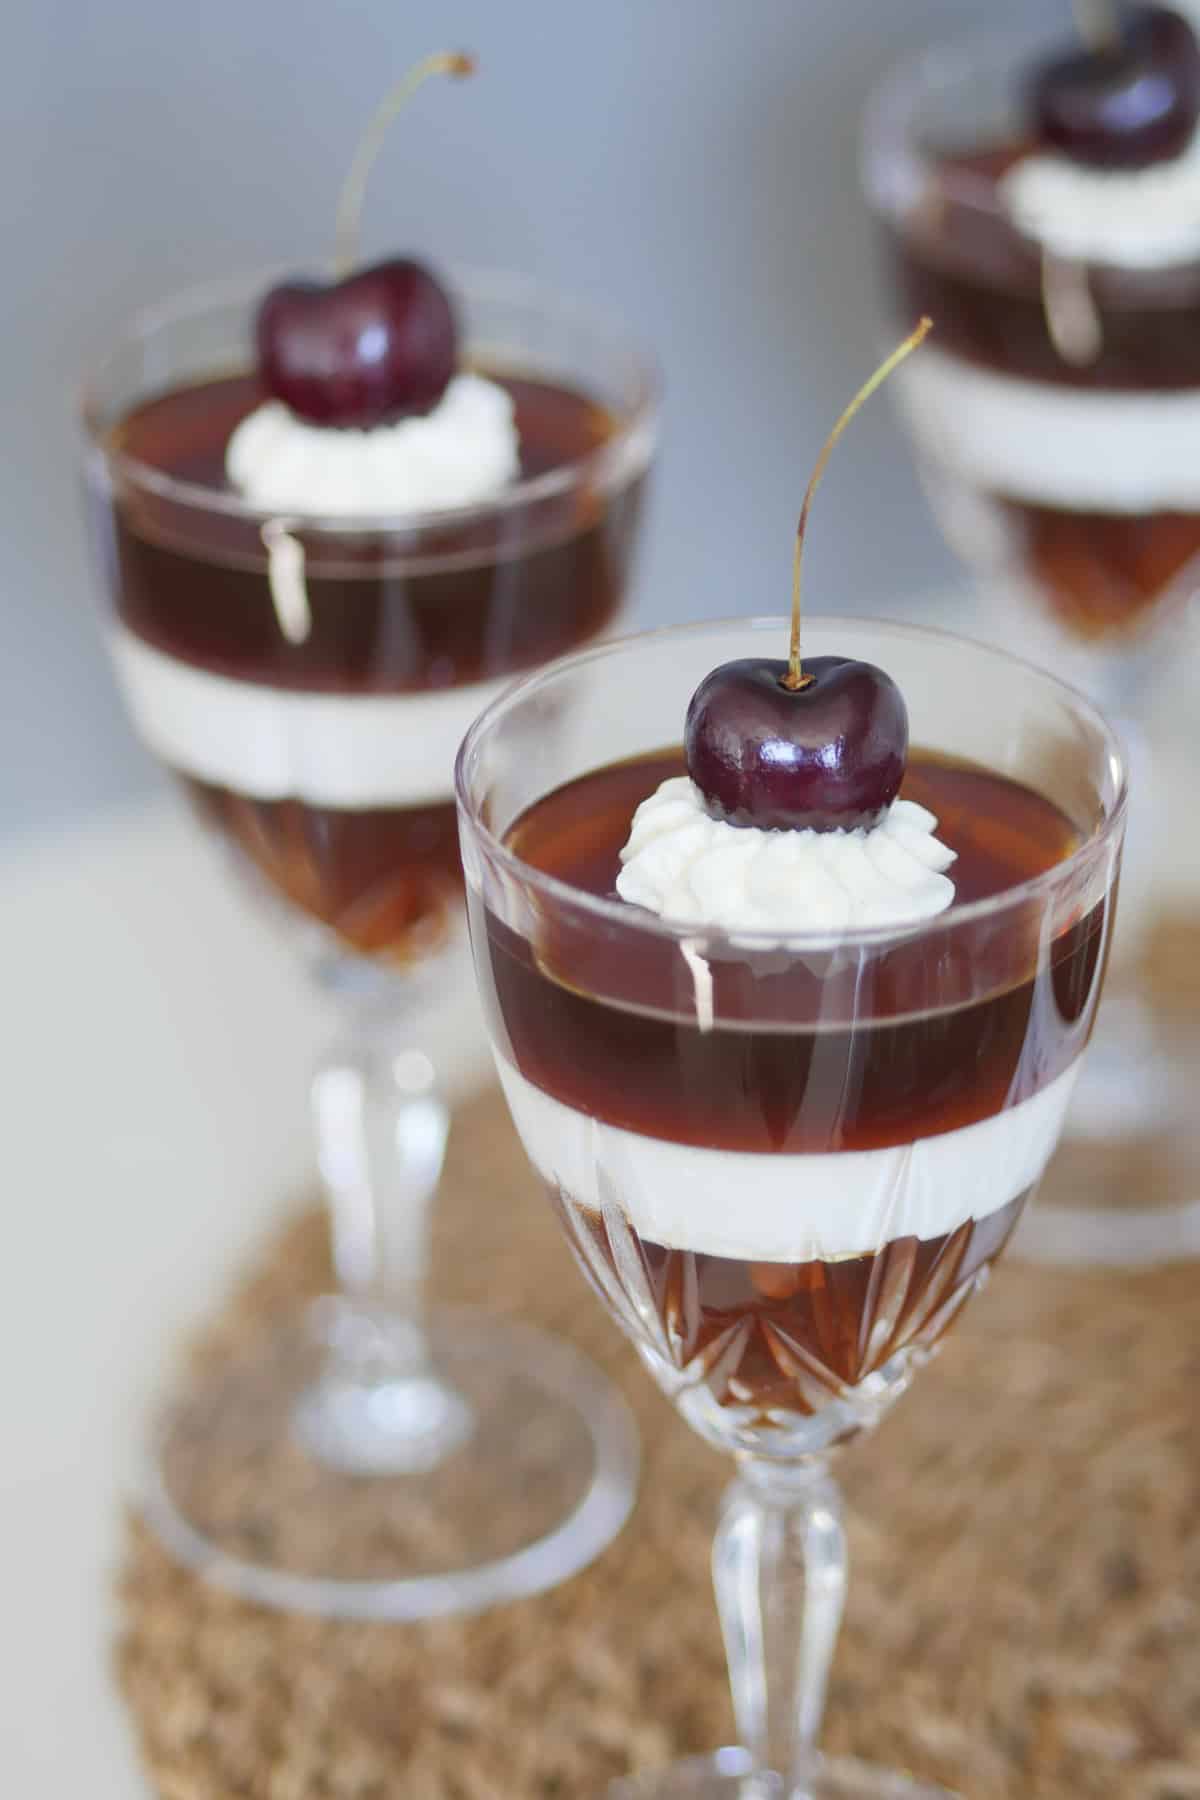 Close up view of a dessert topped with whipped cream and a dark red cherry.